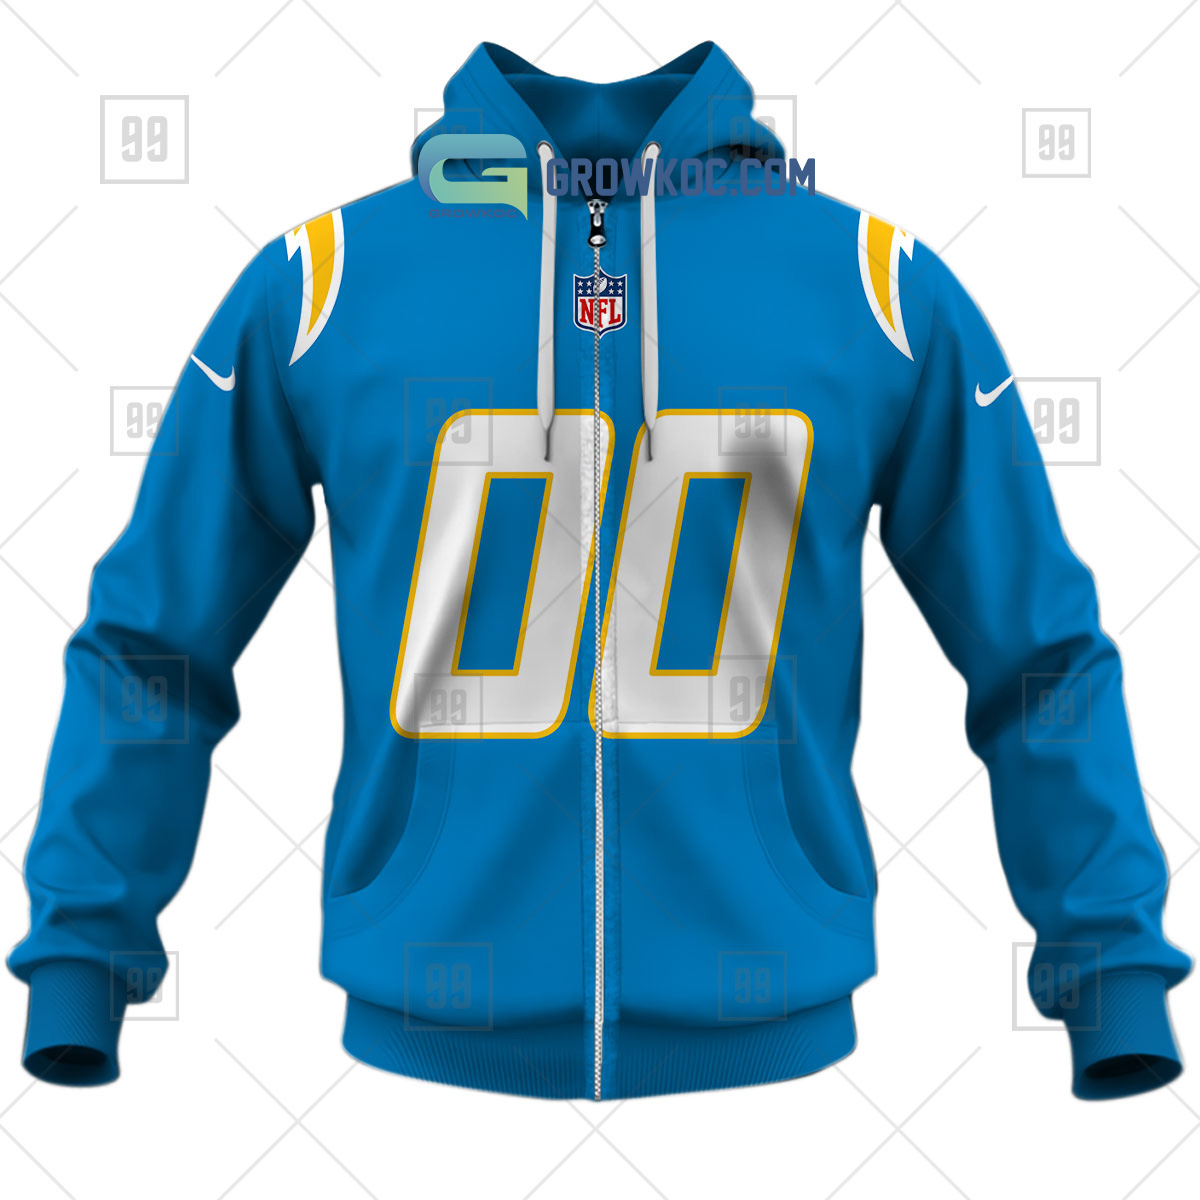 Los Angeles Chargers NFL Personalized Home Jersey Hoodie T Shirt - Growkoc